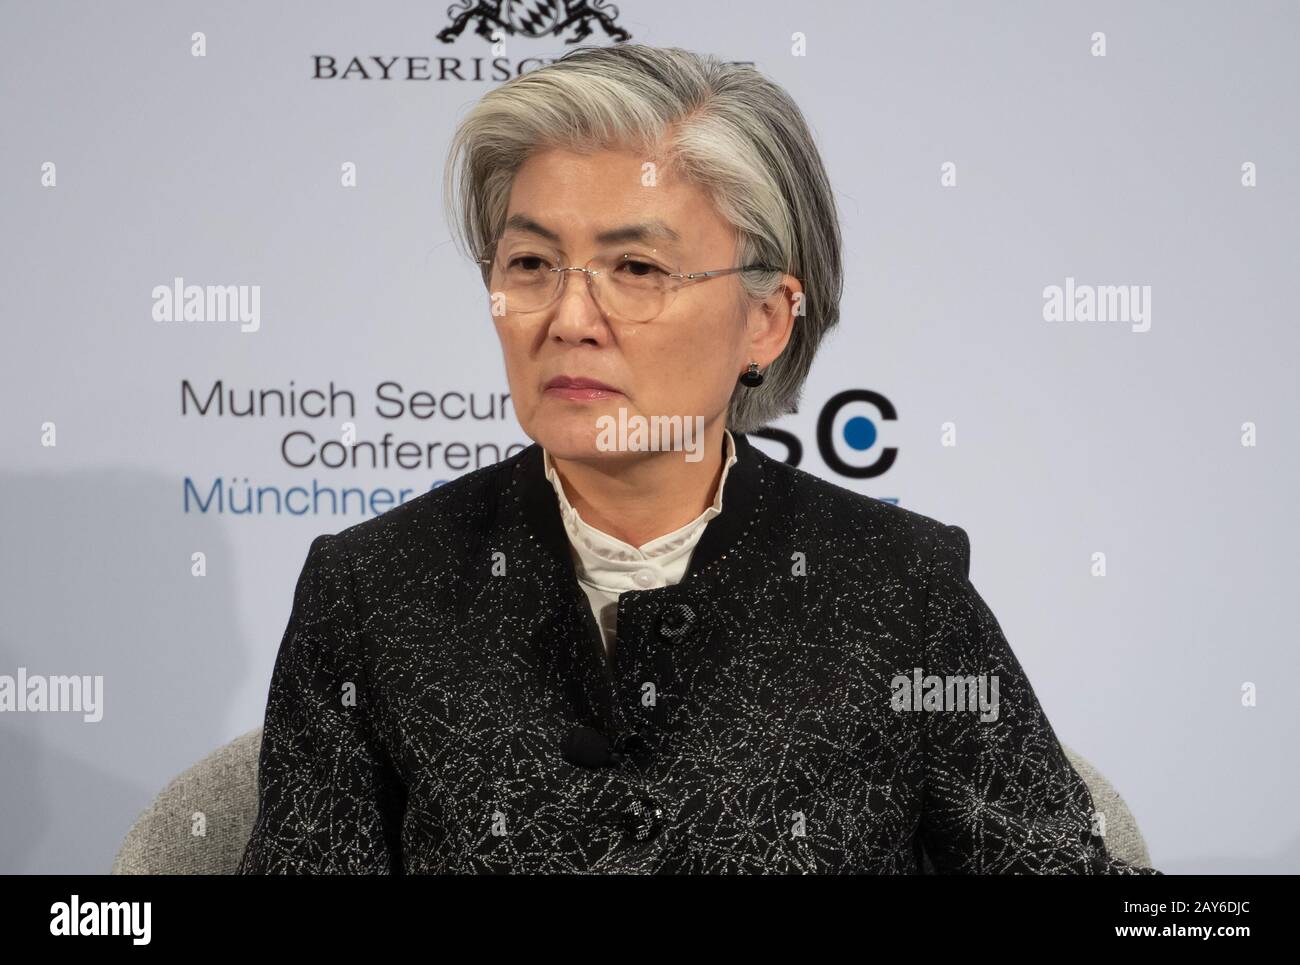 Munich, Germany. 14th Feb, 2020. Kang Kyung Wha, Foreign Minister of South Korea, speaks on the first day of the 56th Munich Security Conference. Some 35 heads of state and government and almost 100 foreign and defence ministers are expected to attend the most important expert meeting on security policy. Credit: Sven Hoppe/dpa/Alamy Live News Stock Photo